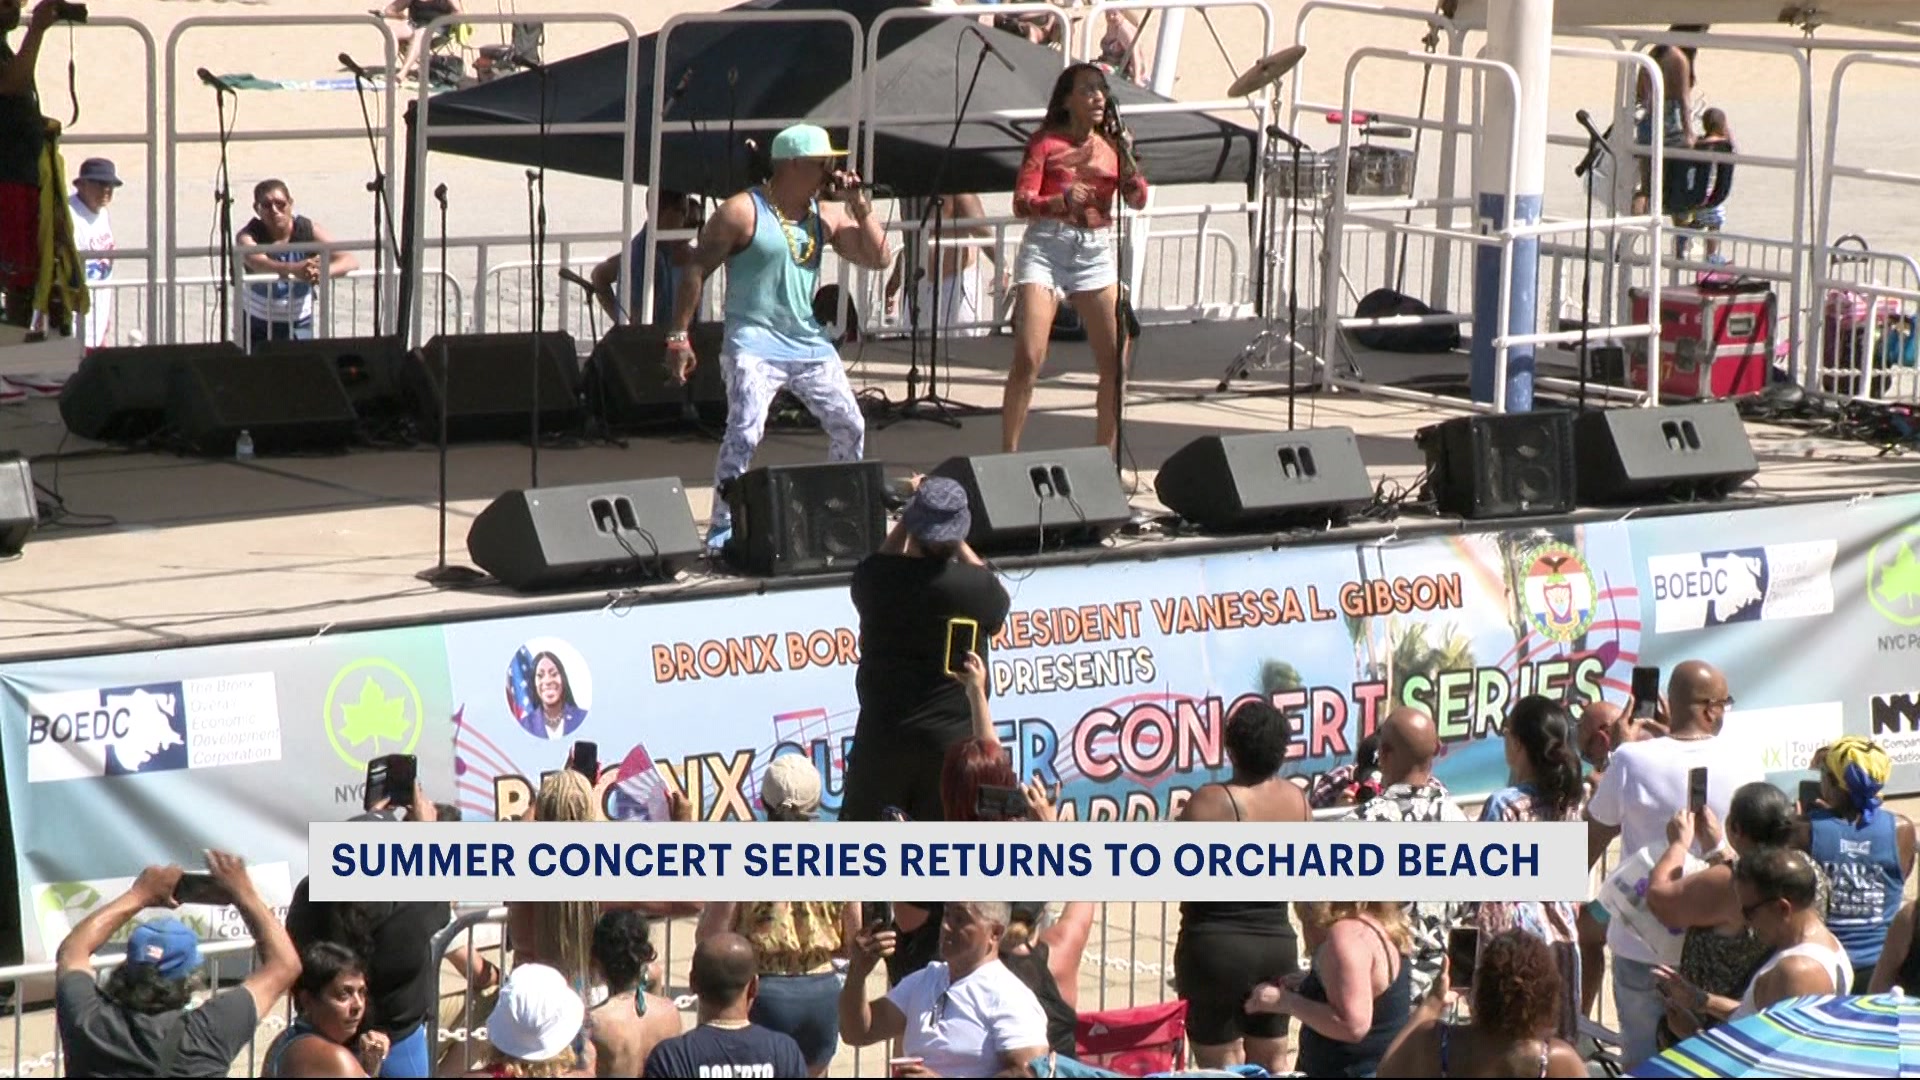 Bronx Summer Concert Series kicks off at Orchard Beach with C&C Music